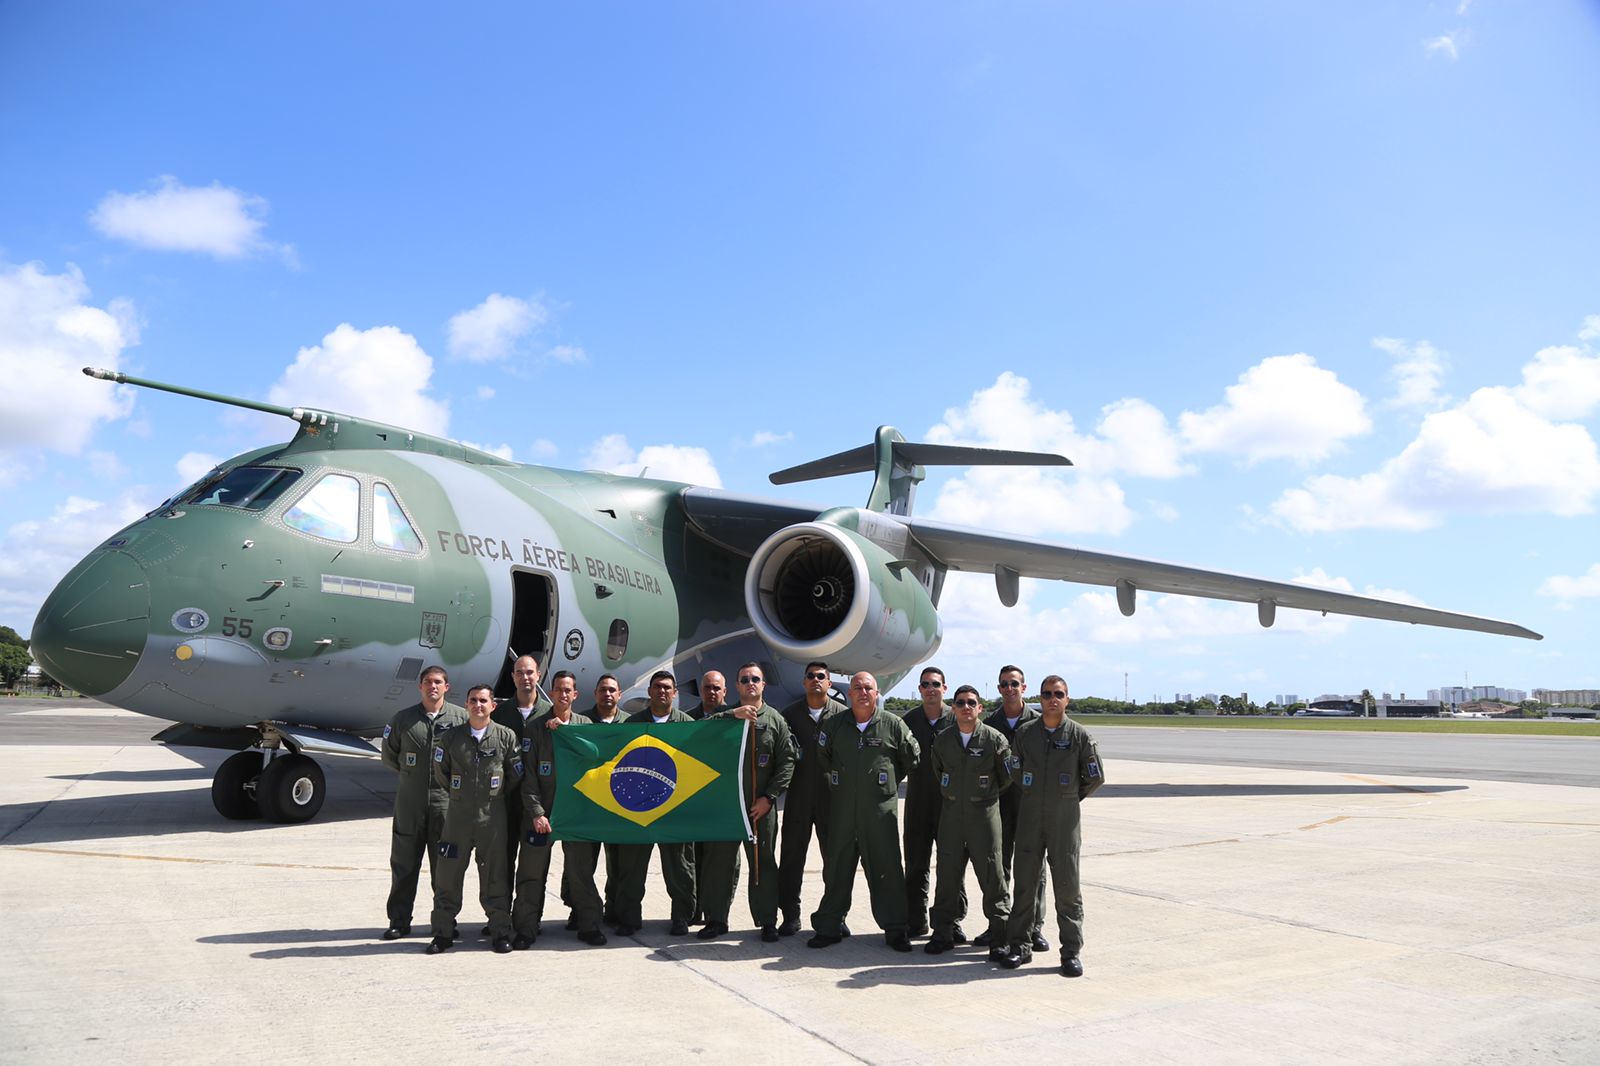 In Brazilian Air Force (FAB) Planes, Brazilians and Foreigners from Ukraine Arrive in Brazil | MORE THAN FLY